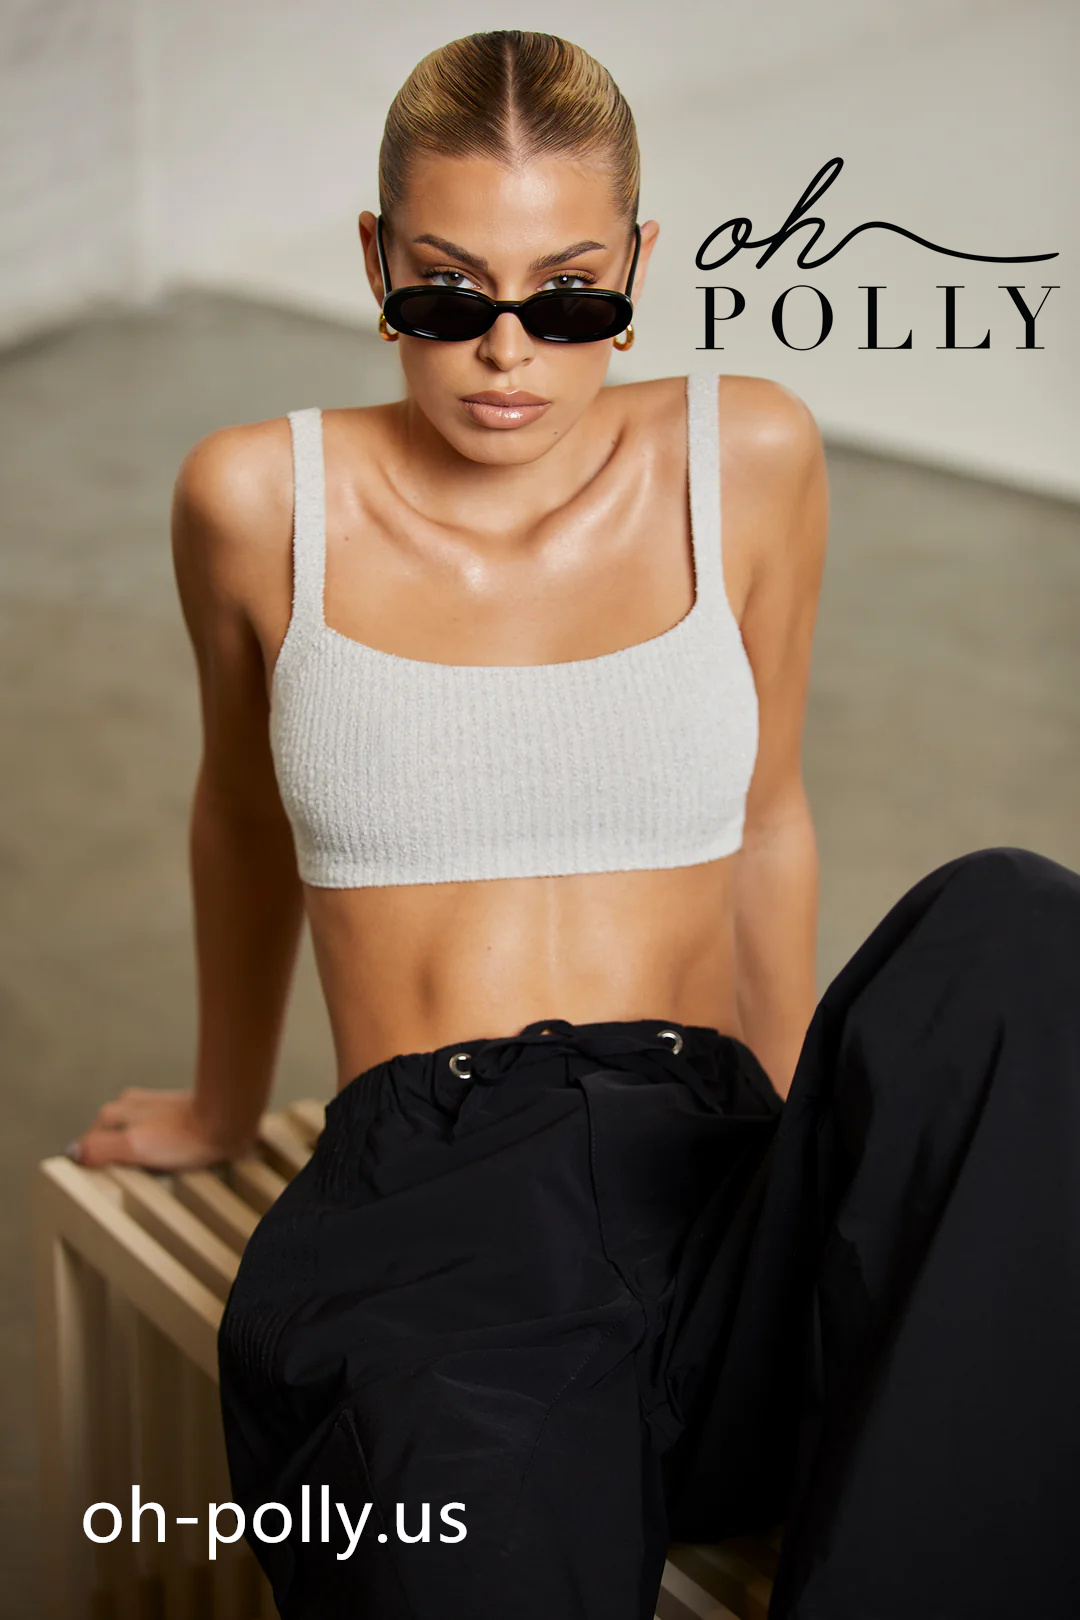 Oh Polly USA tops trend-leading